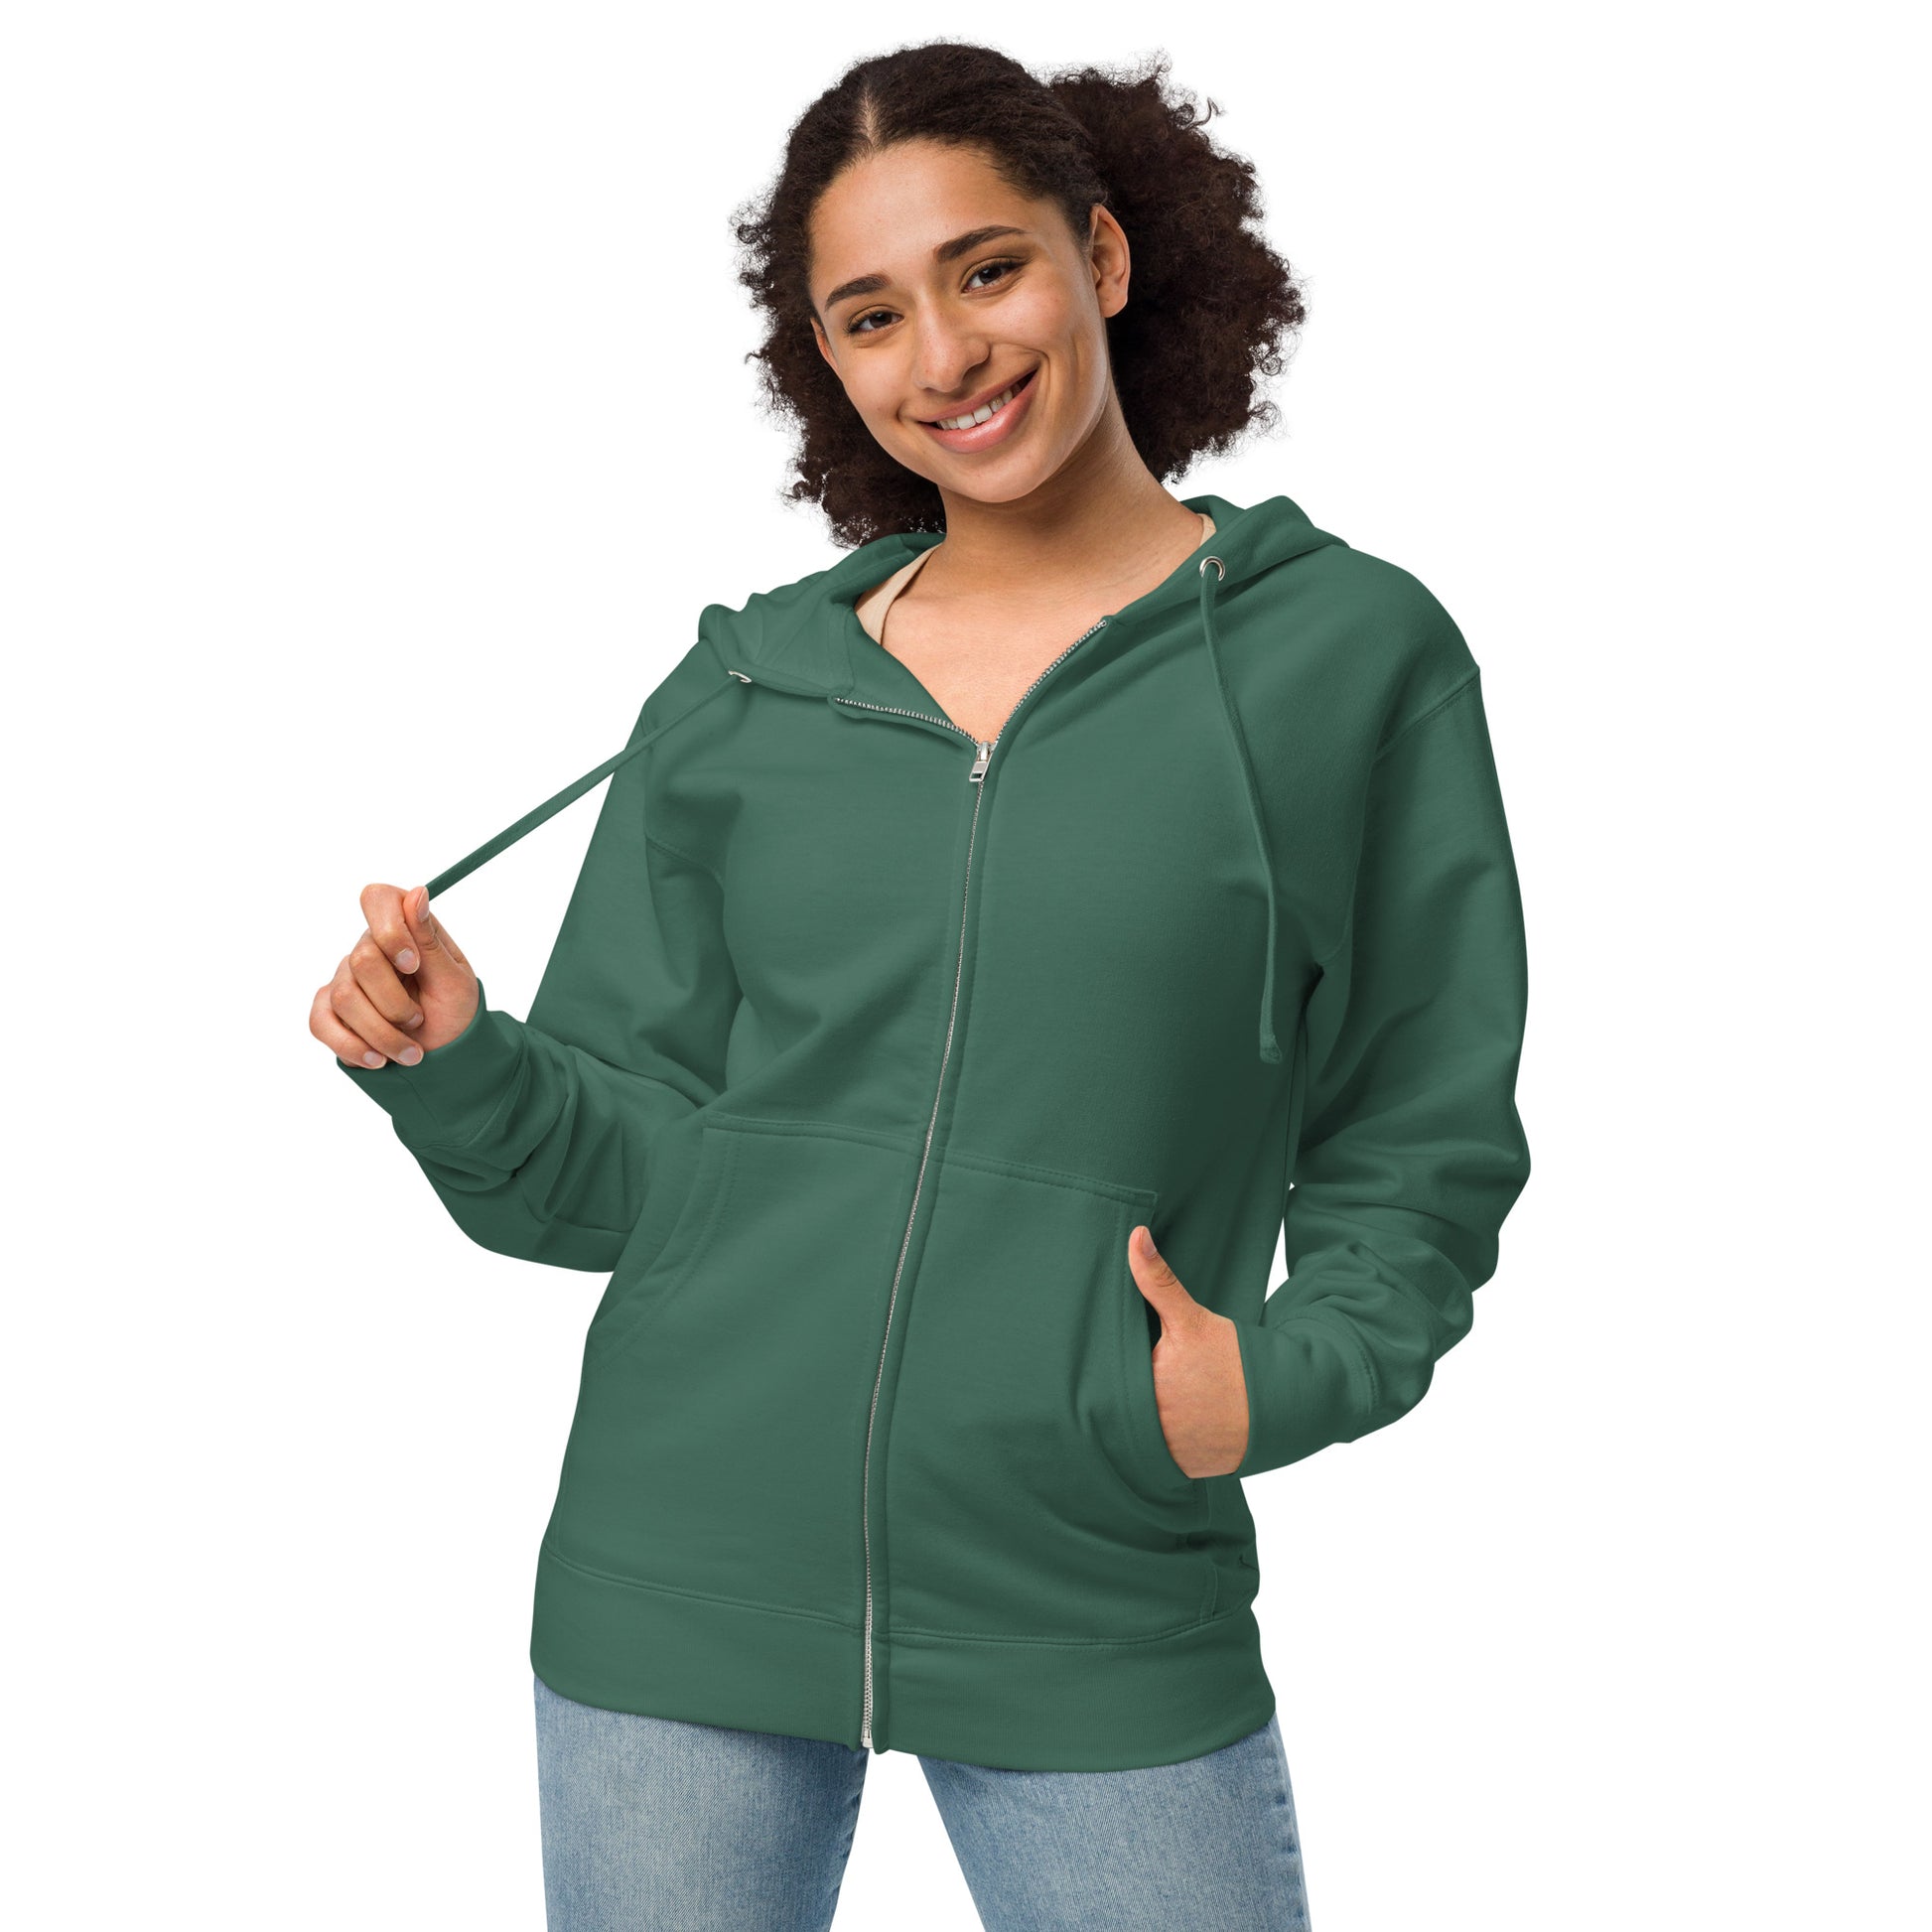 Alpine green colored unisex fleece zip up hoodie. Back design features a watercolor fox in the grass with ferns and mushrooms. Has a jersey-lined hood, metal eyelets and zipper. Front view of hoodie jacket on female model.